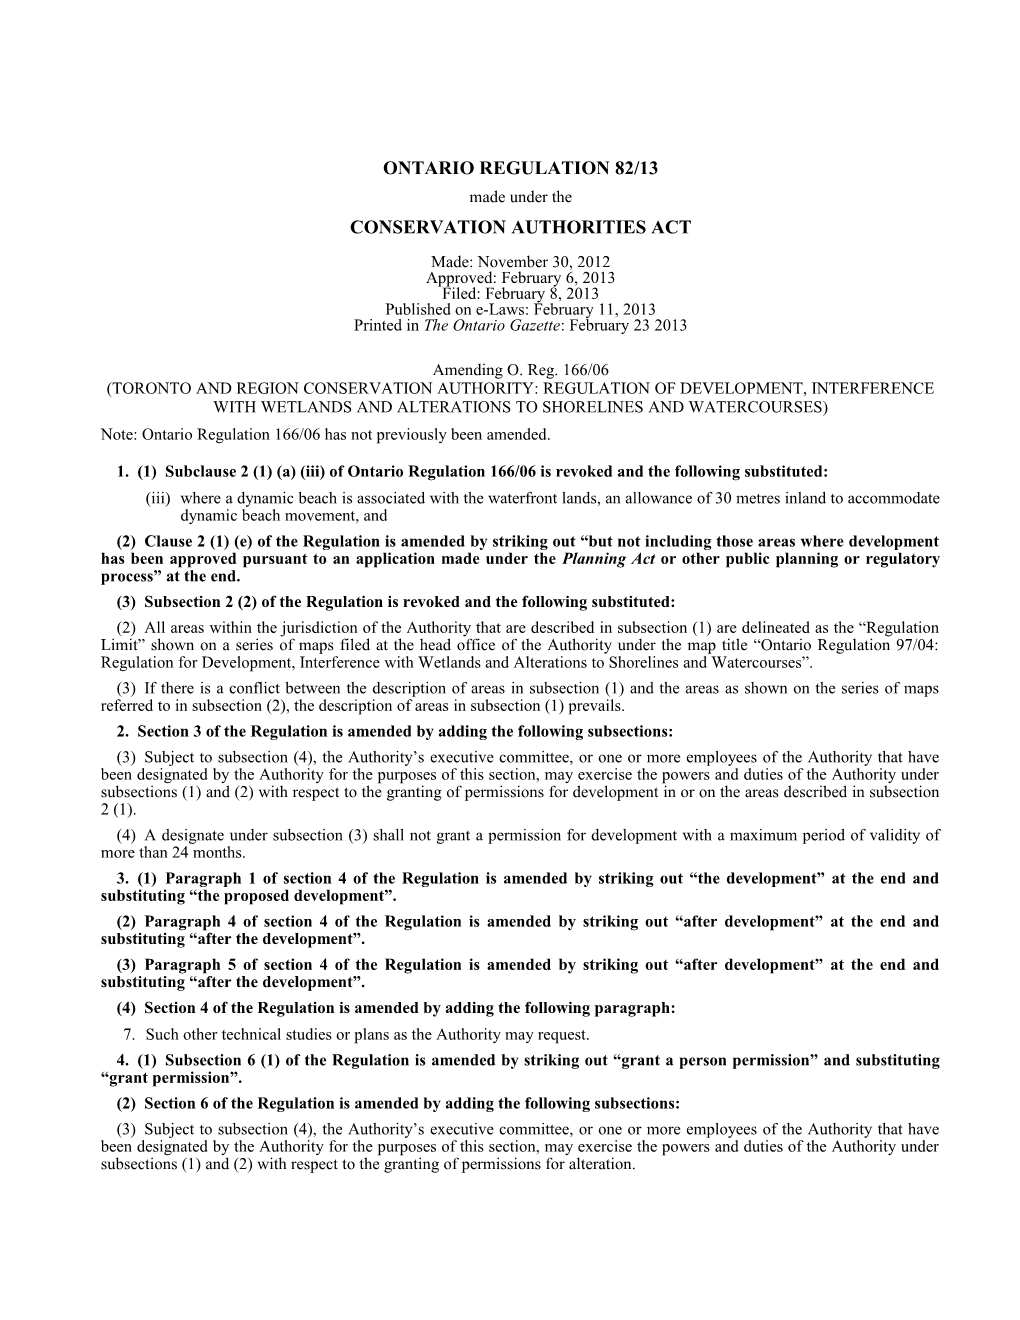 CONSERVATION AUTHORITIES ACT - O. Reg. 82/13